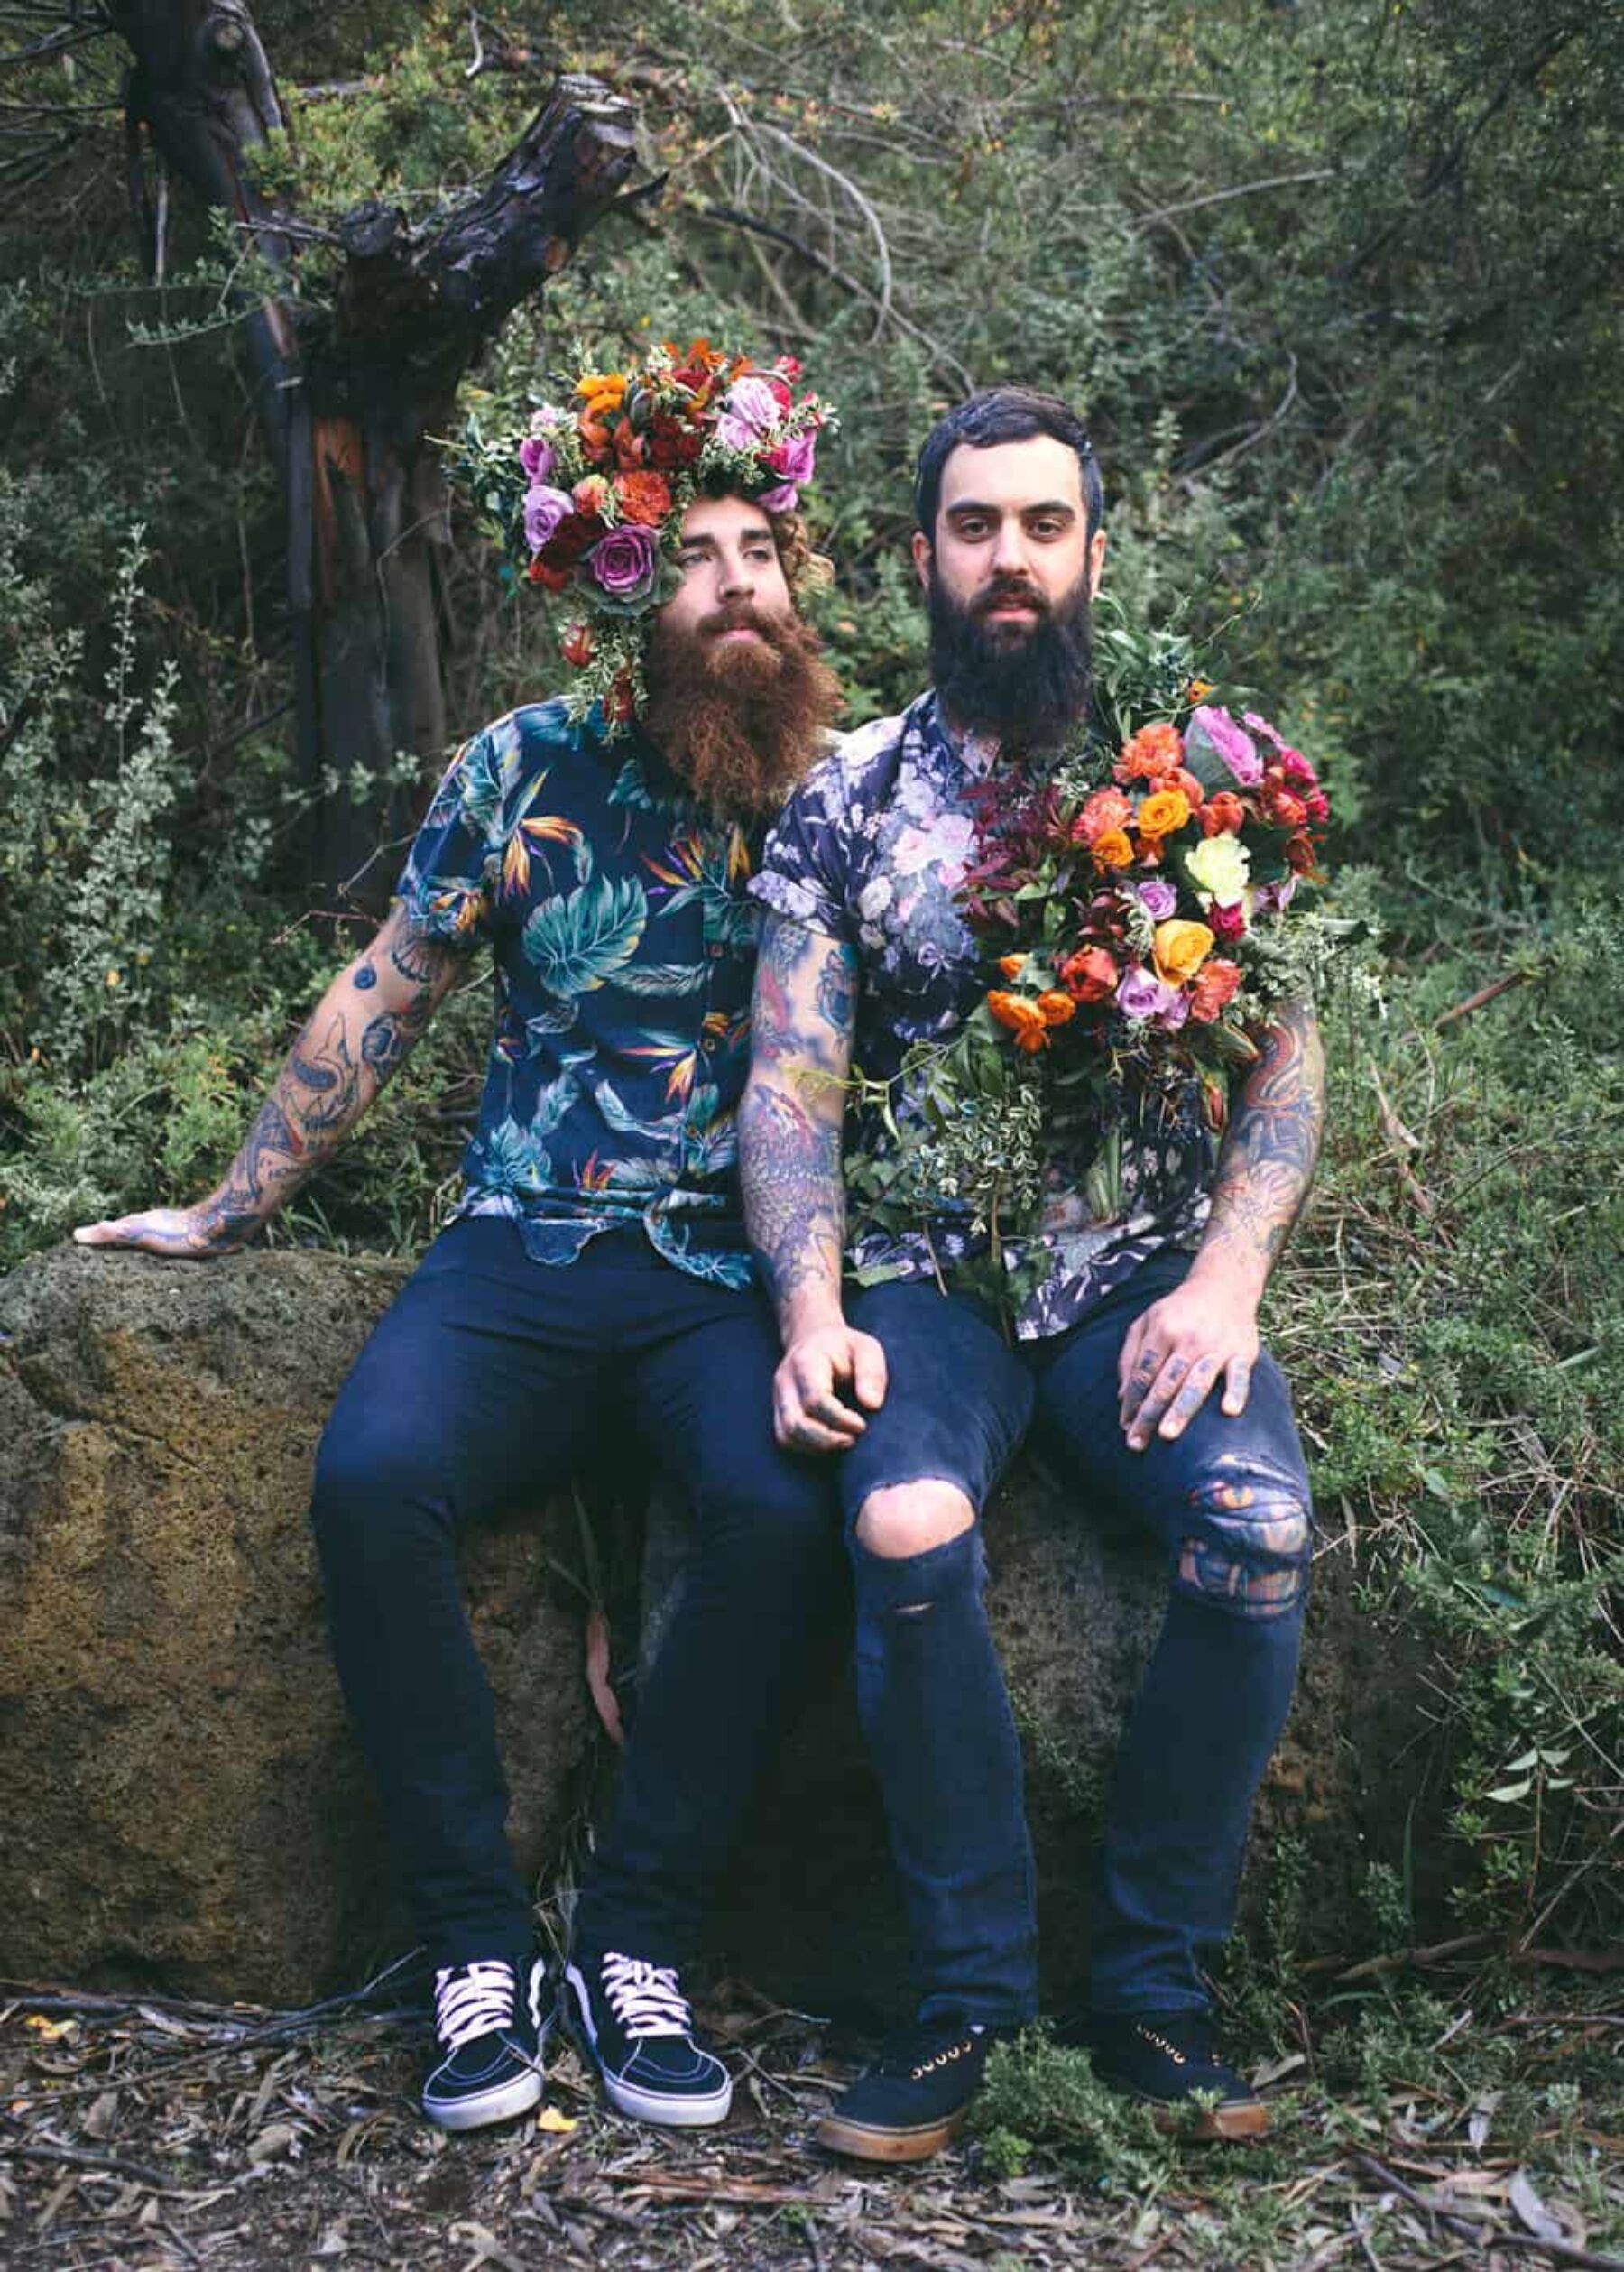 Beards & Blooms | Equal love shoot by Raven and the Rose